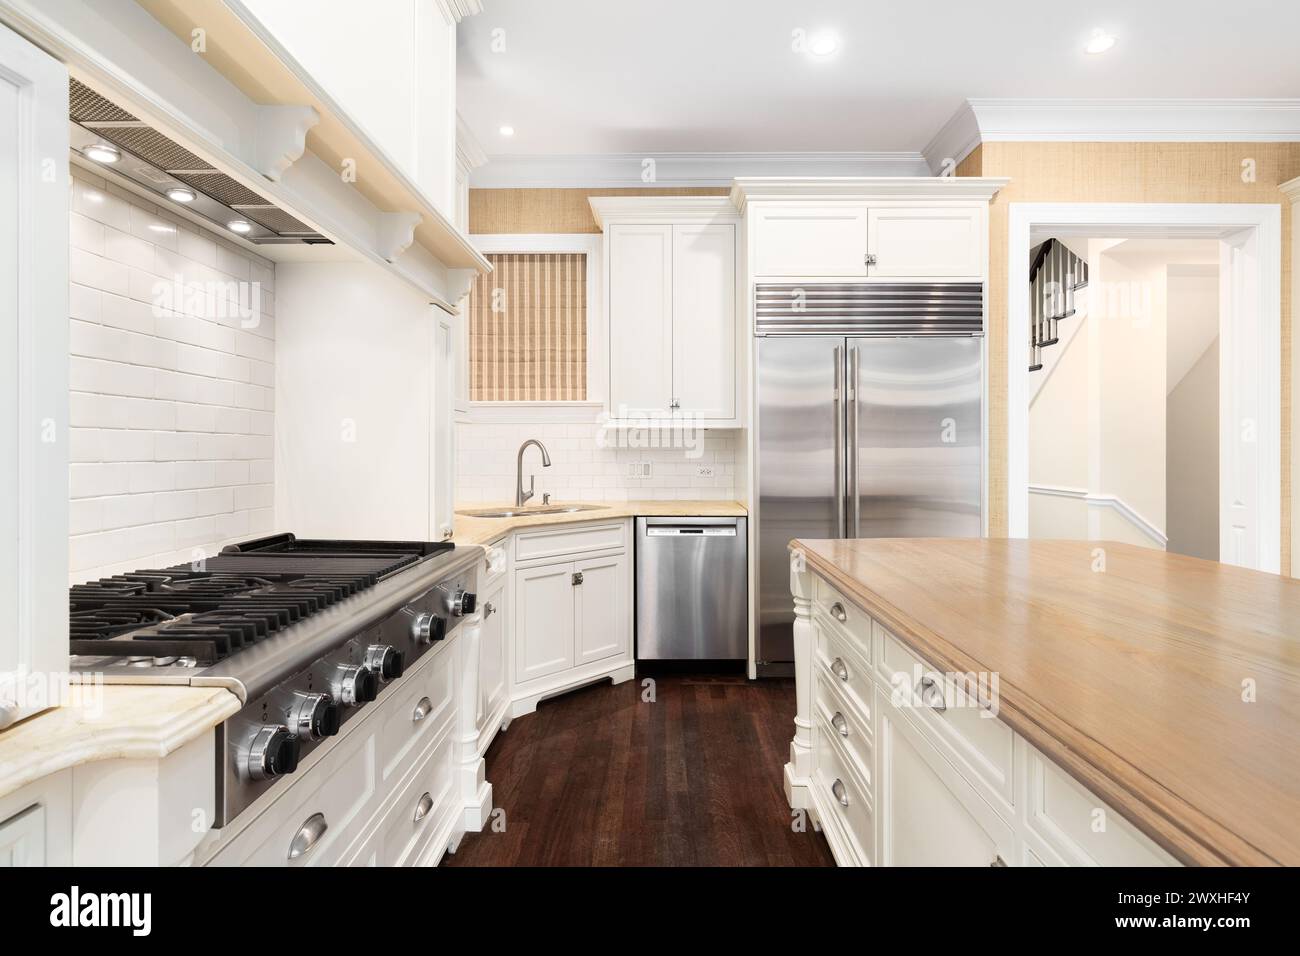 A kitchen detail with stainless steel appliances, a large range hood over a stove top, and white cabinets. No brands or labels. Stock Photo